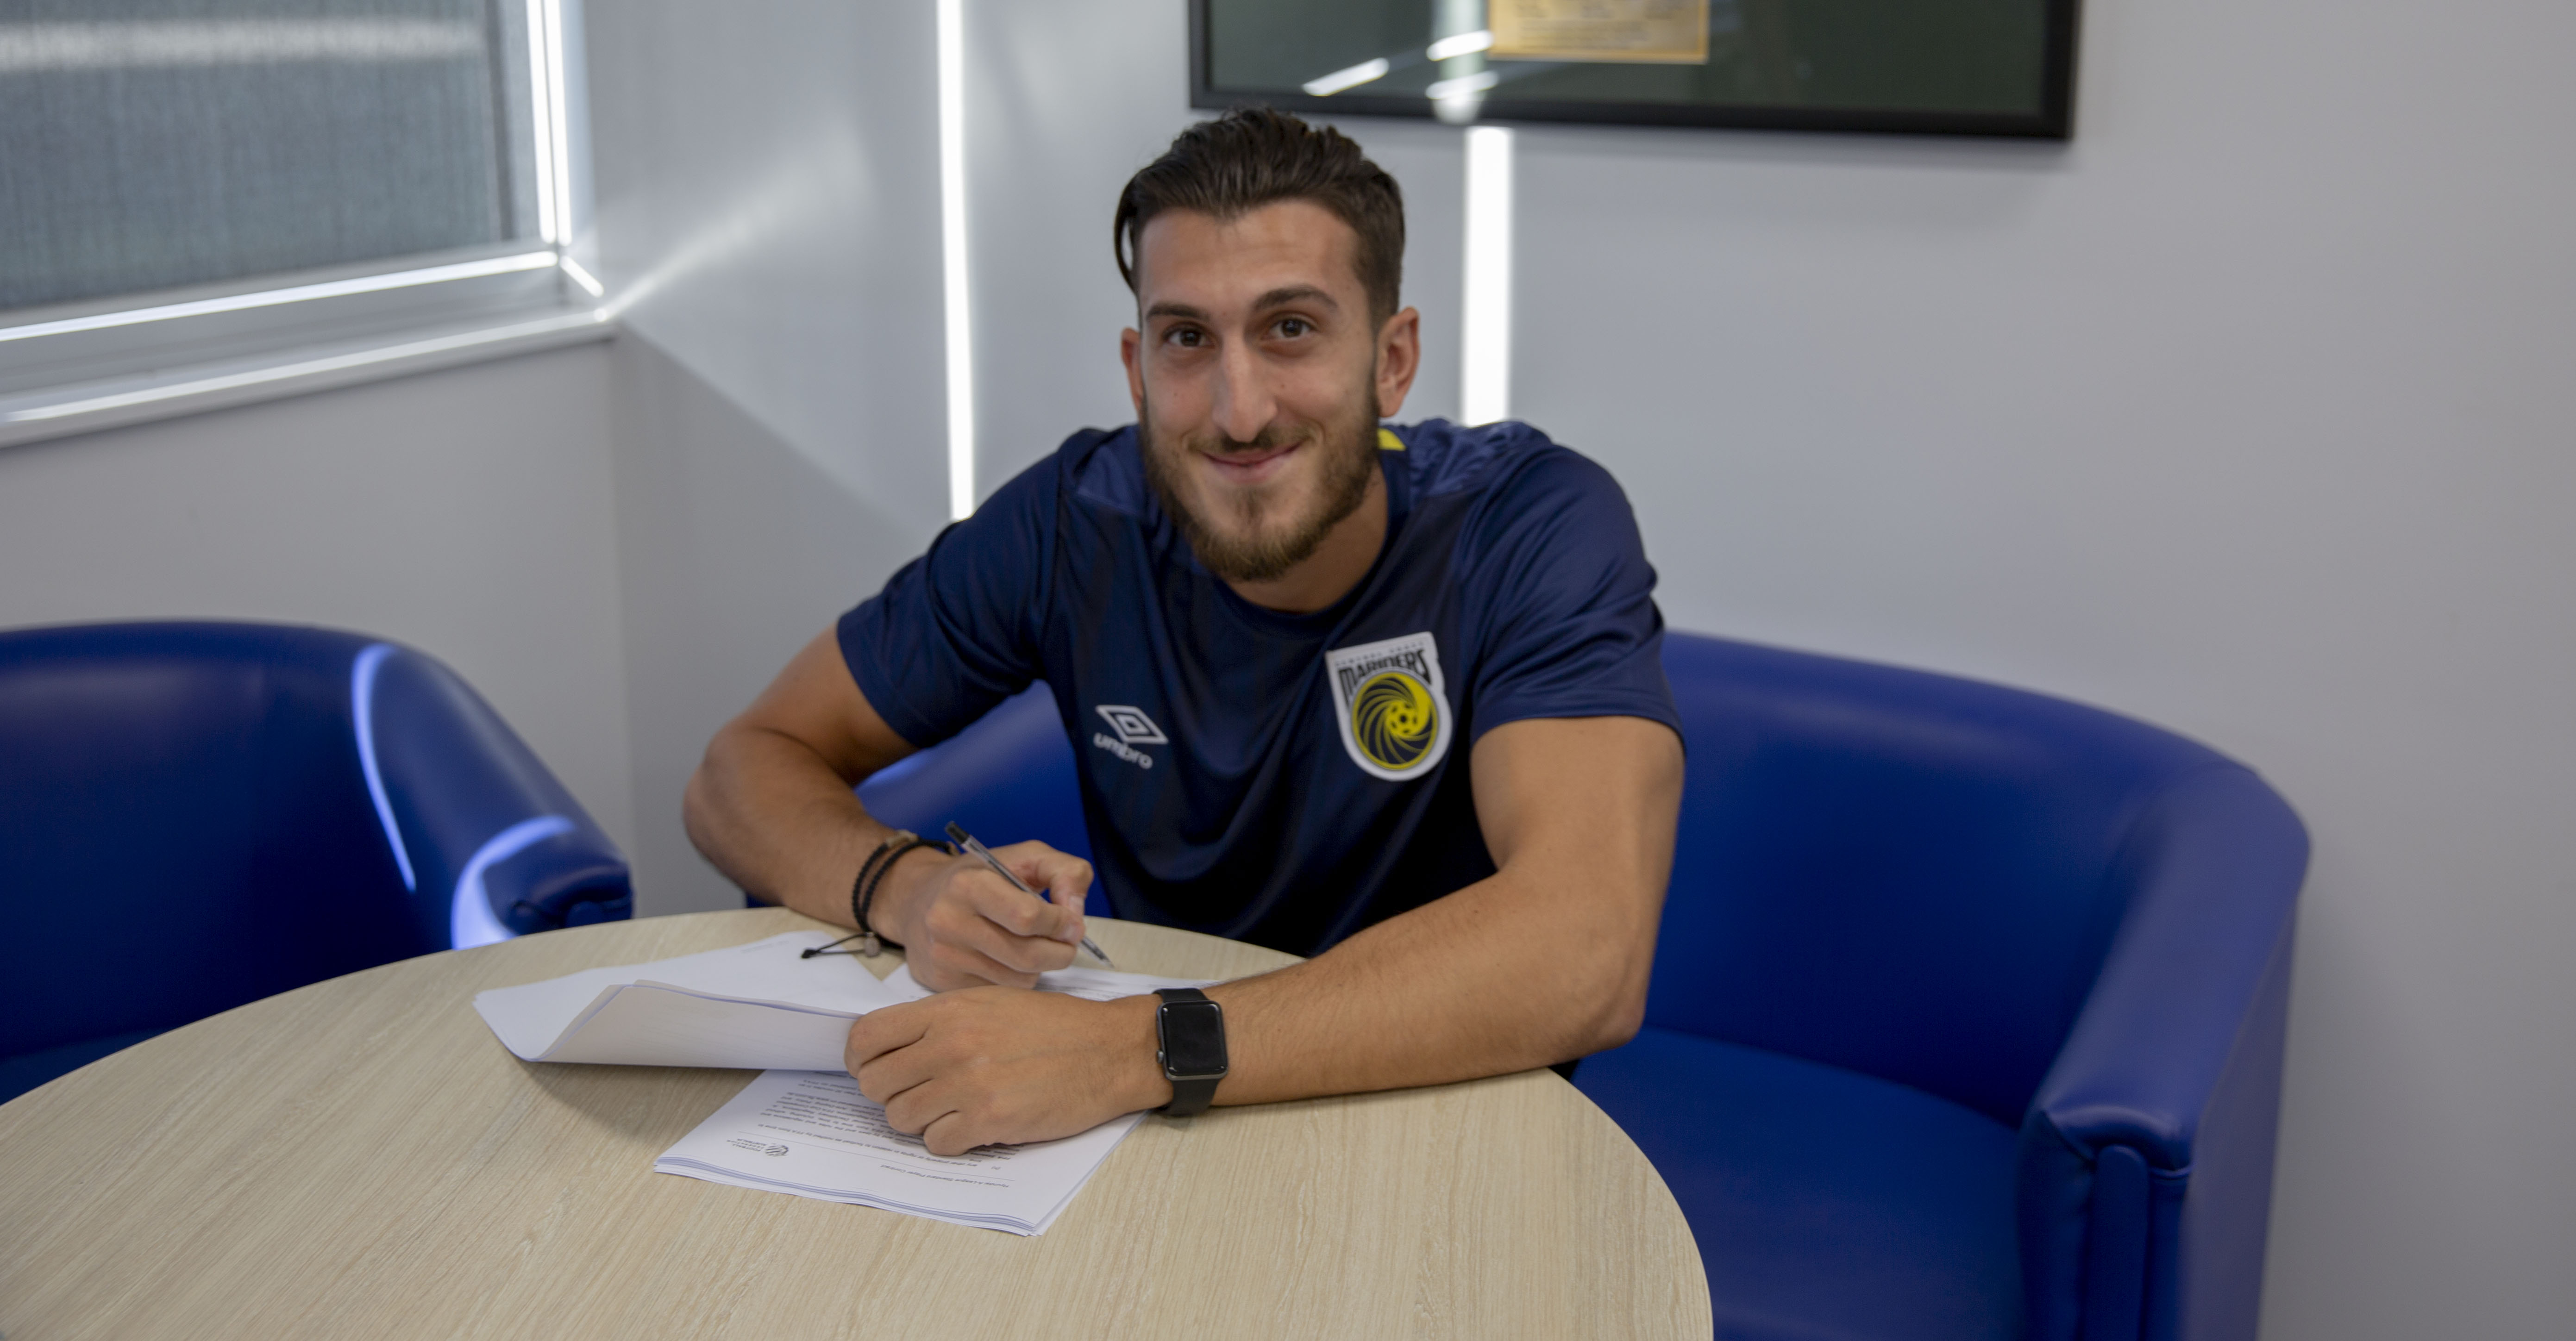 Giancarlo Gallifuoco signs for the Central Coast Mariners